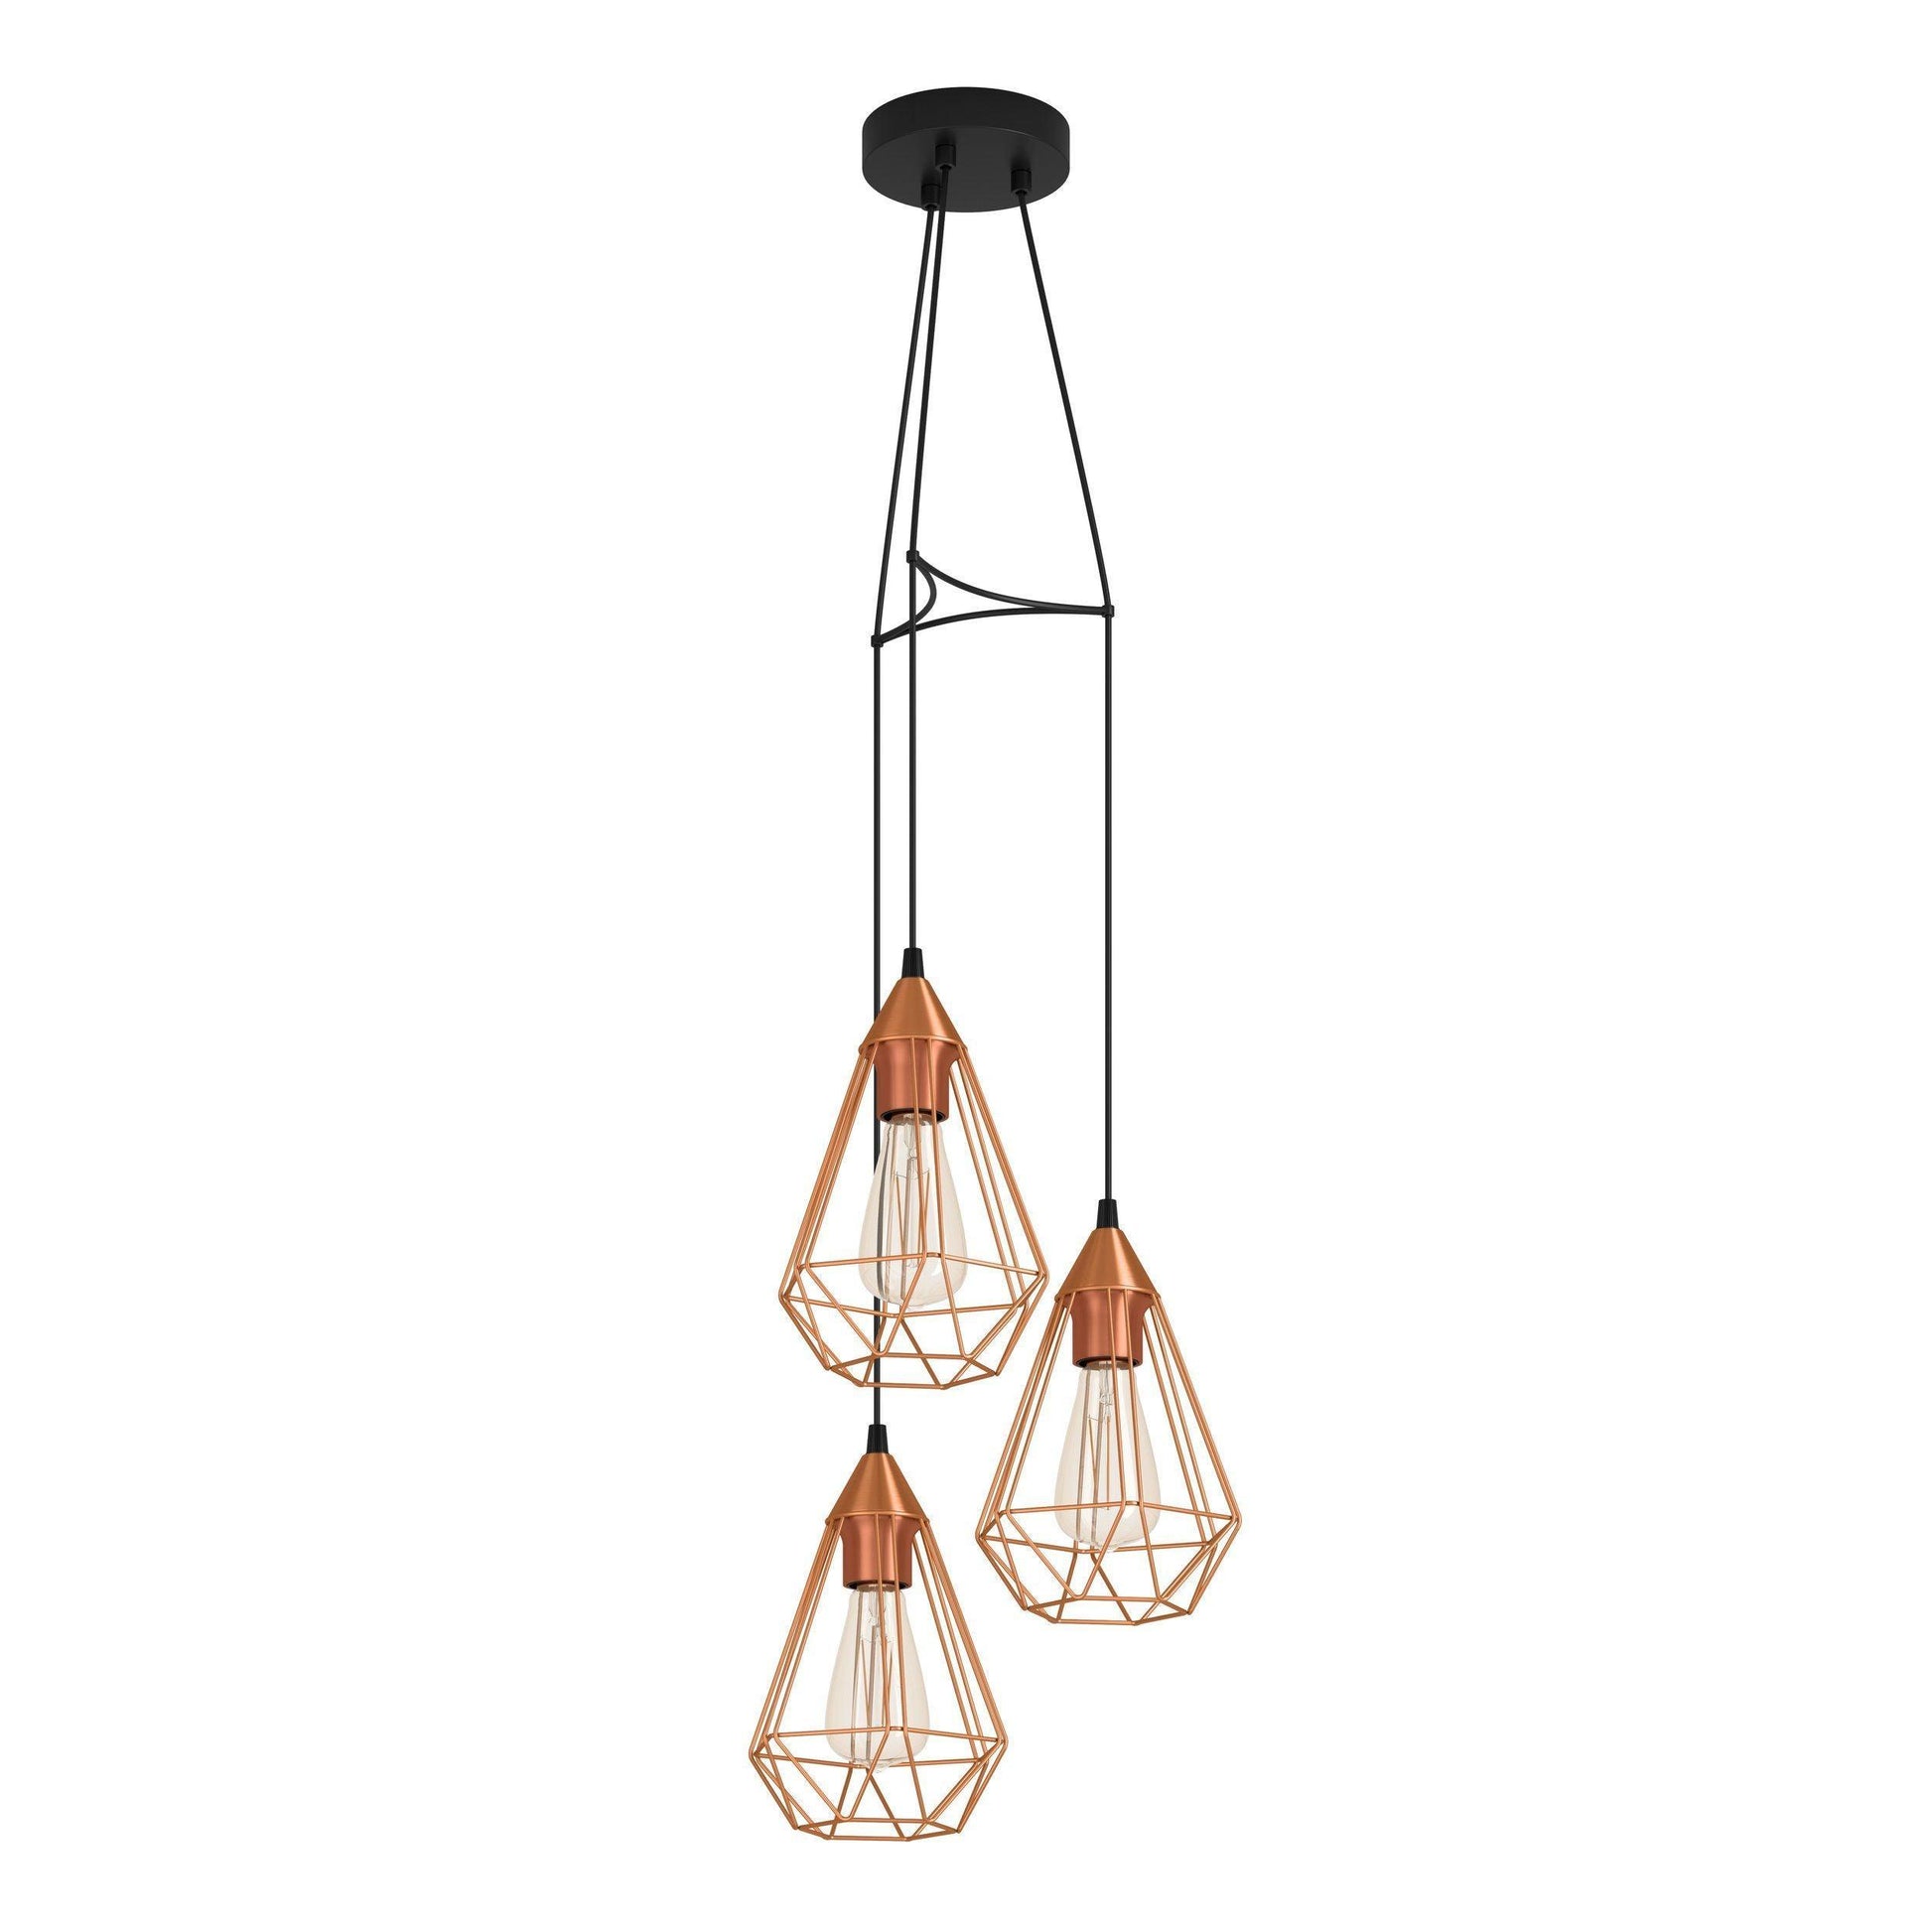 TARBES Pendant Light by The Light Library